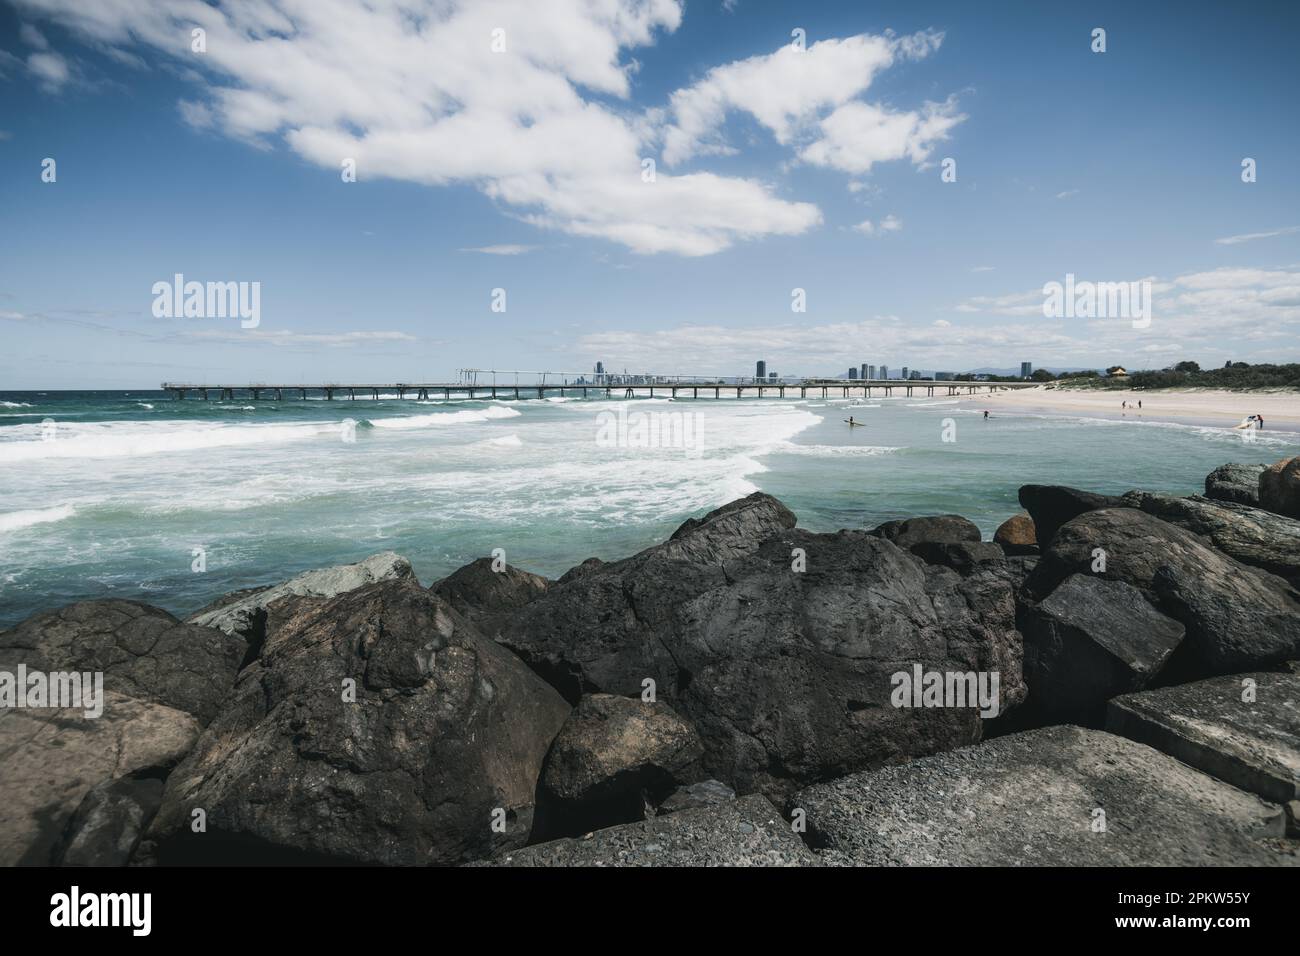 The Spit, Gold Coast, Queensland, Australia. View from the seaway, over the rocks towards the jetty. Stock Photo